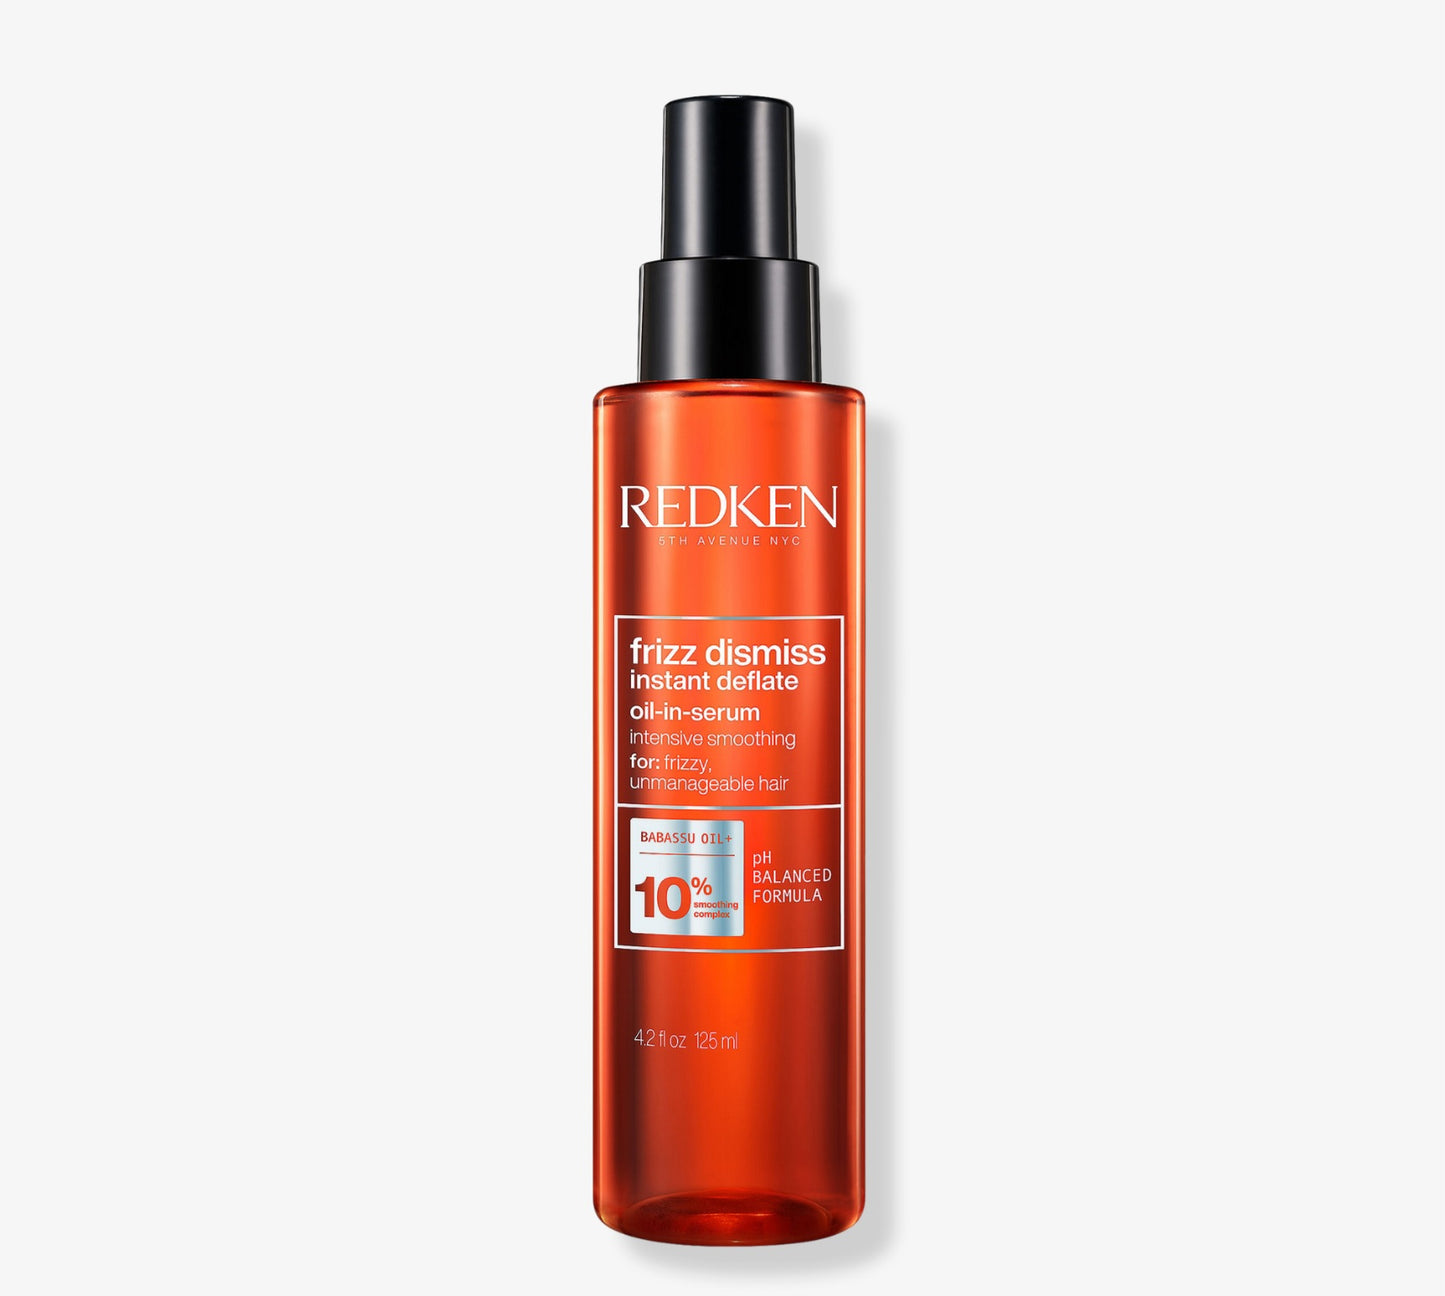 Redken Frizz Dismiss Instant Deflate Oil In Serum for Frizzy Hair